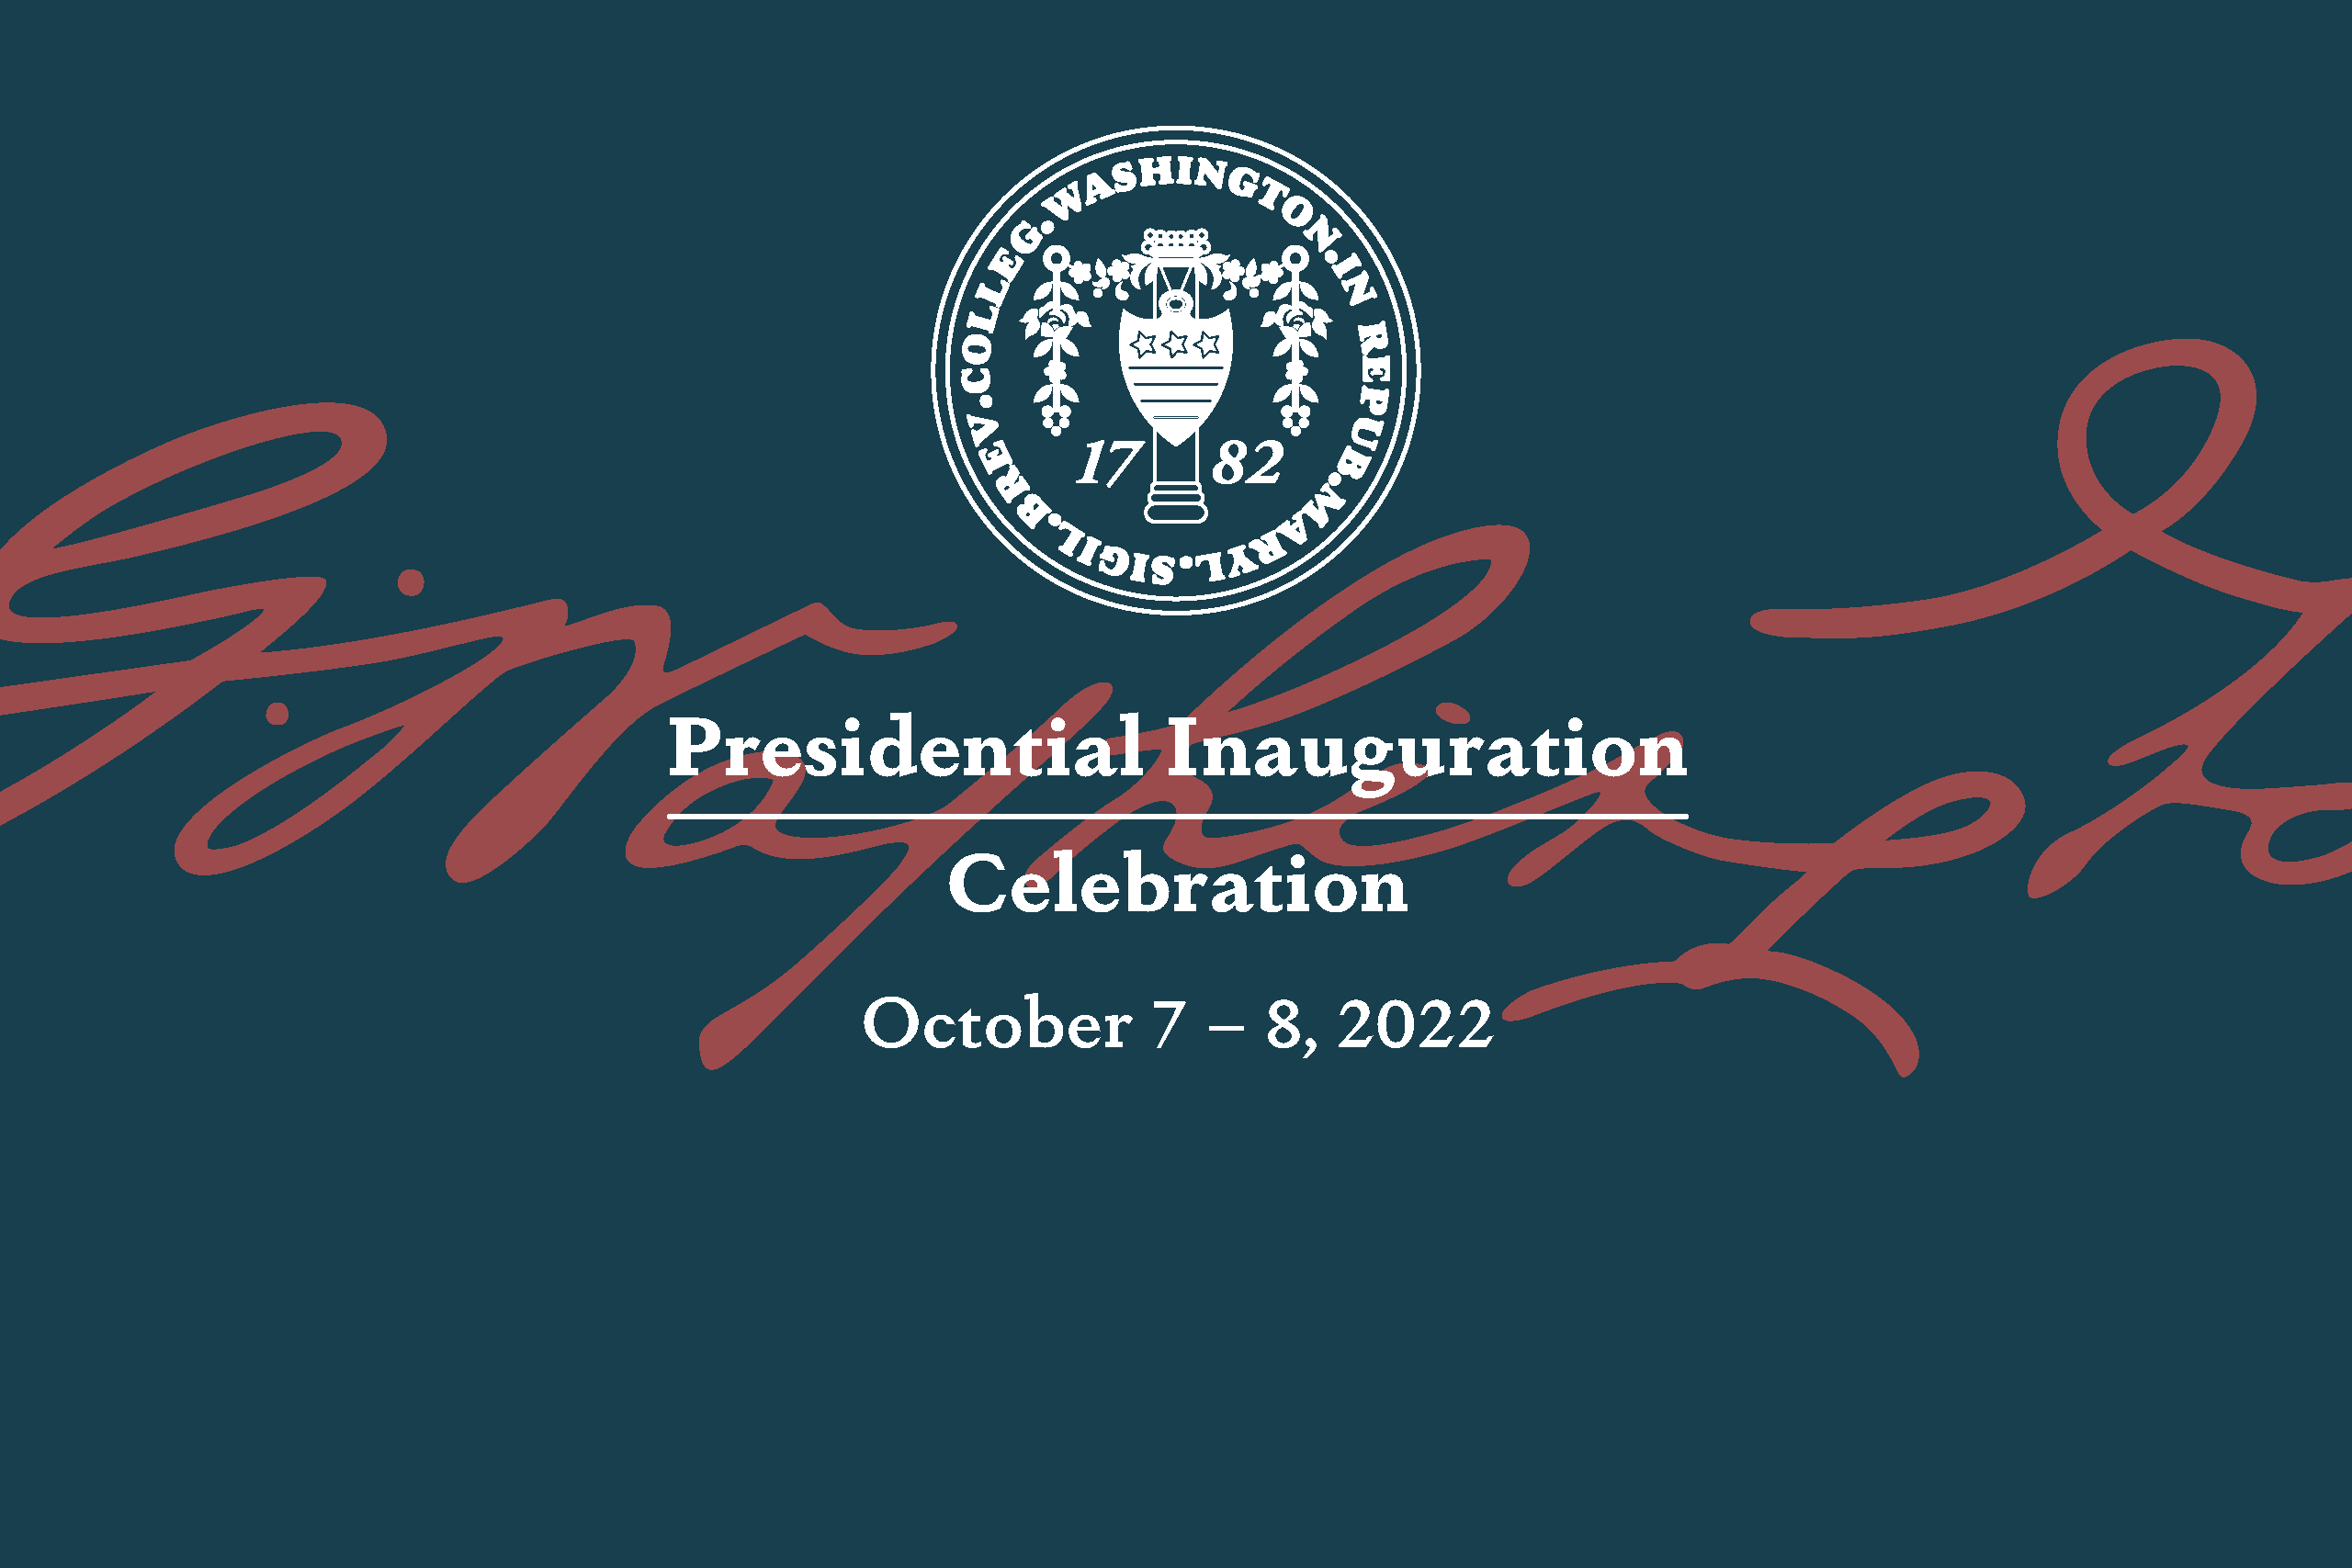 Inauguration announcement for Washington College's 31st President Dr. Michael J. Sosulski on October 8, 2022.